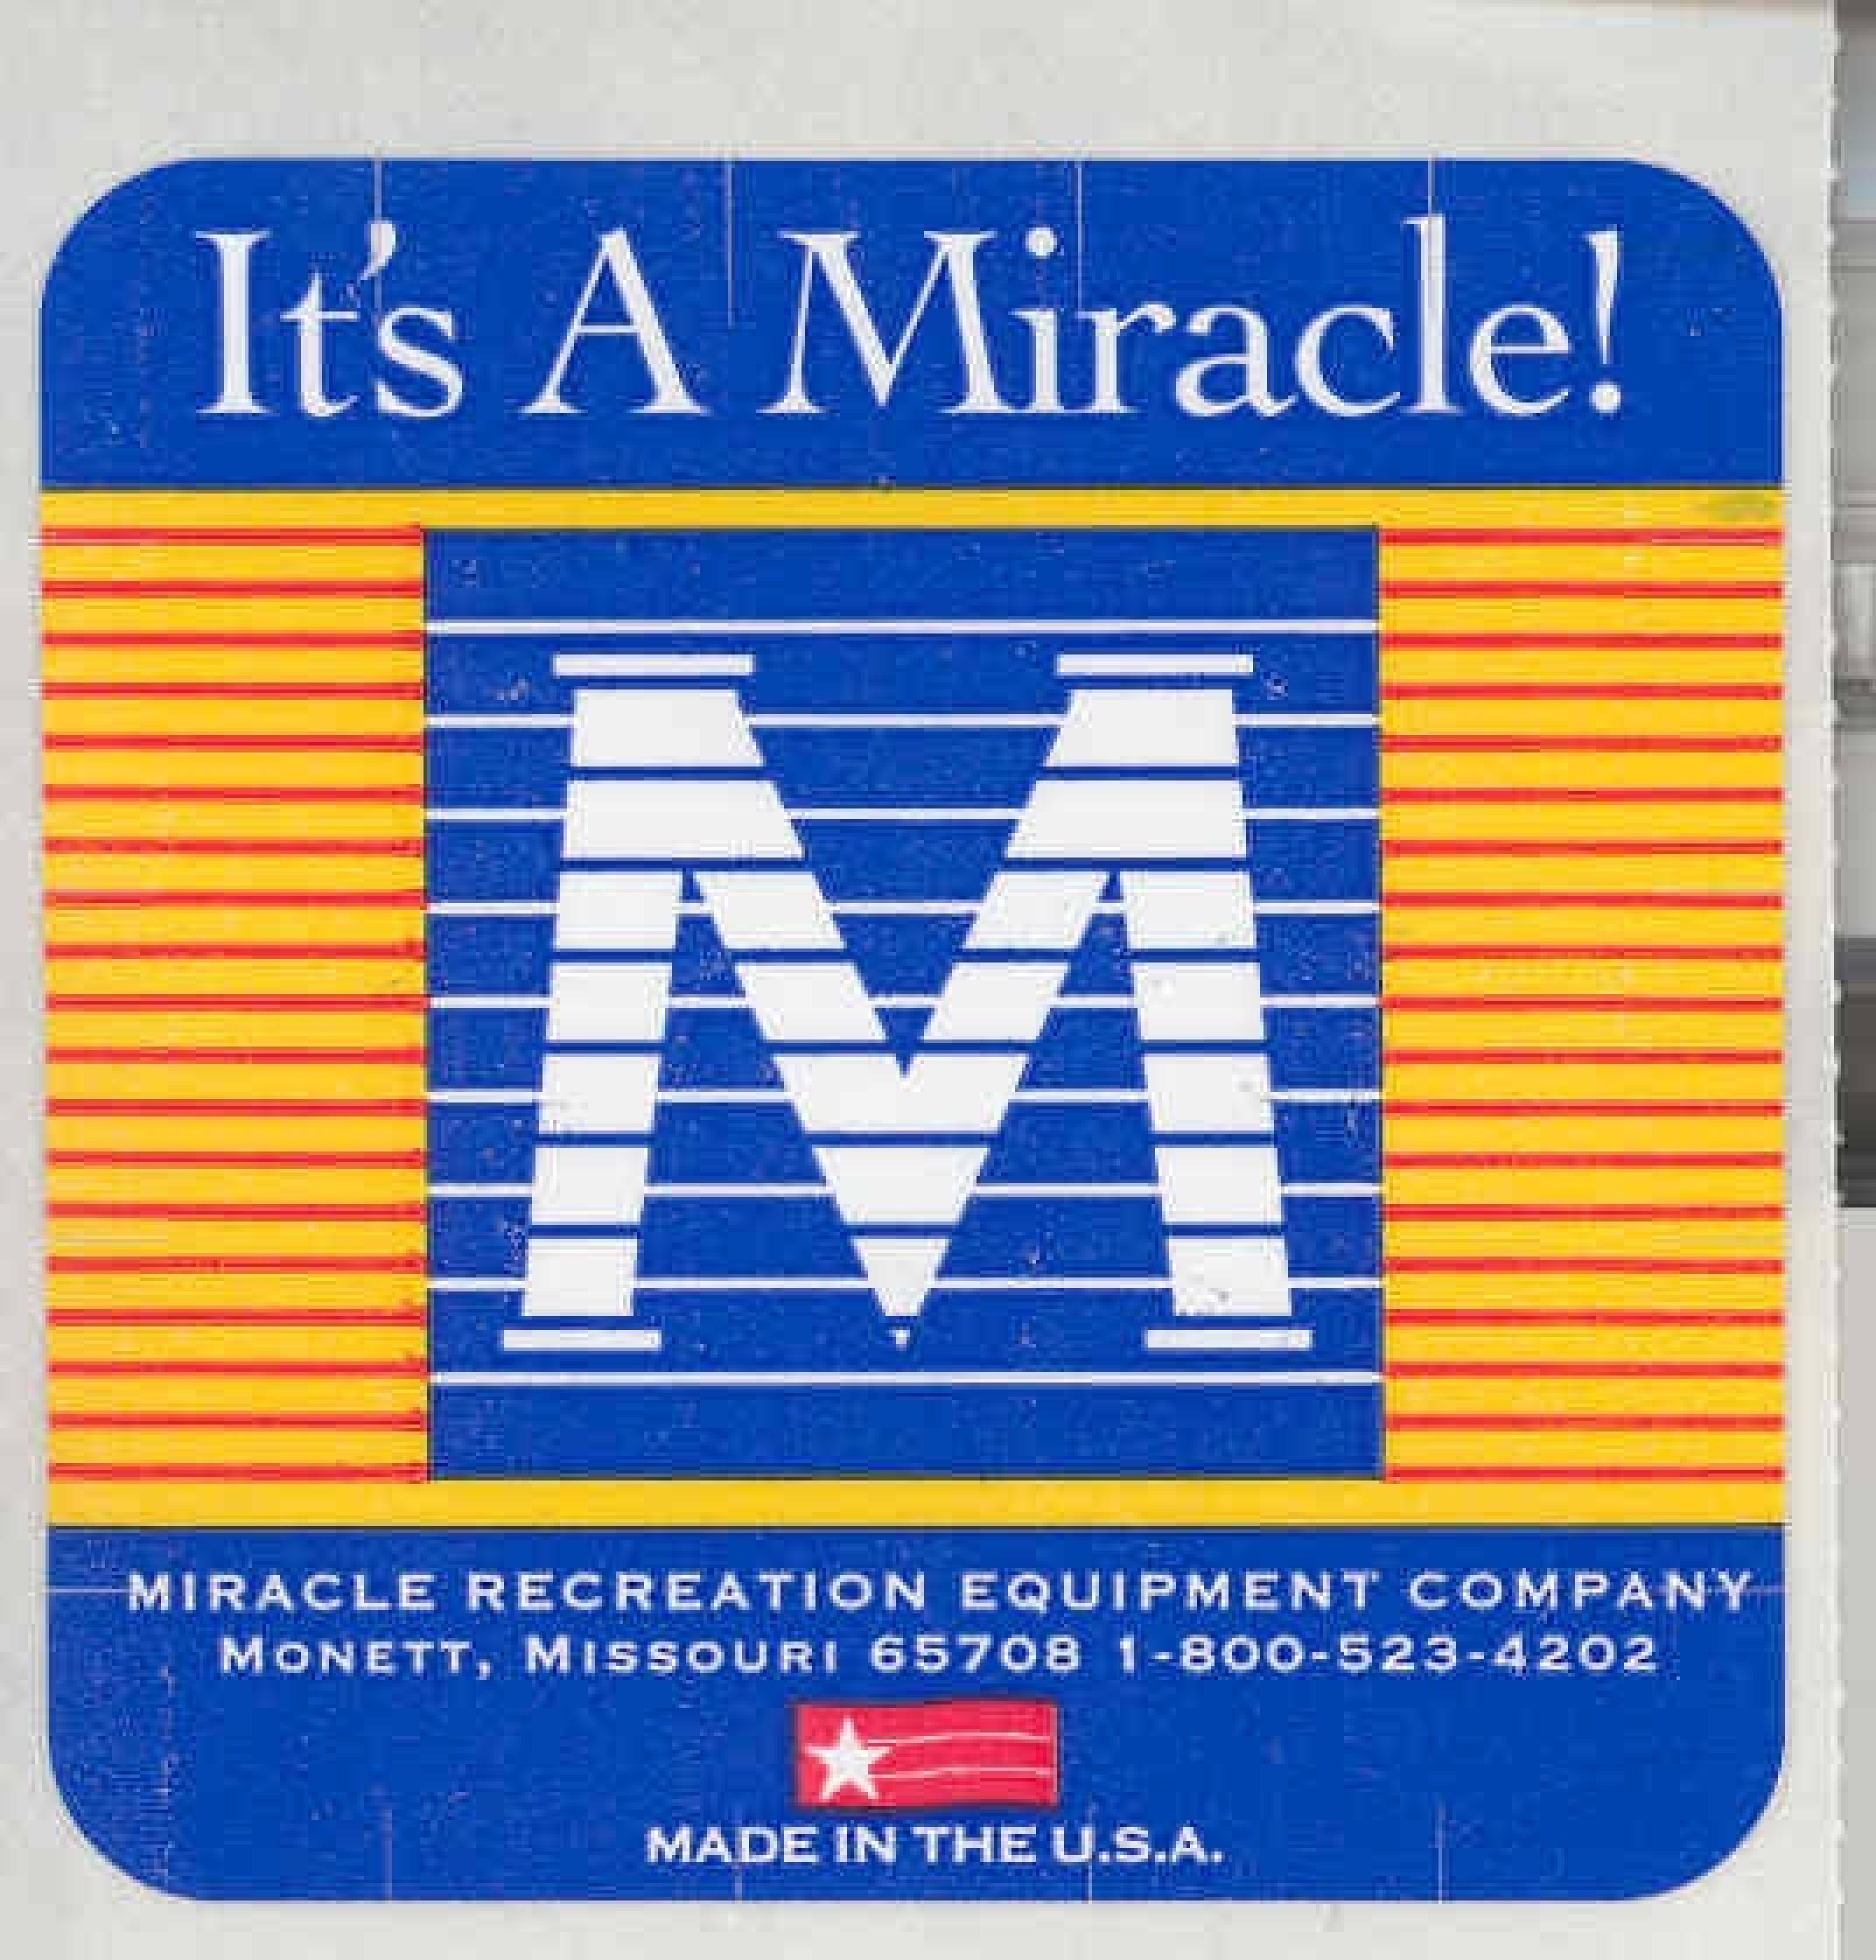 MIRACLE